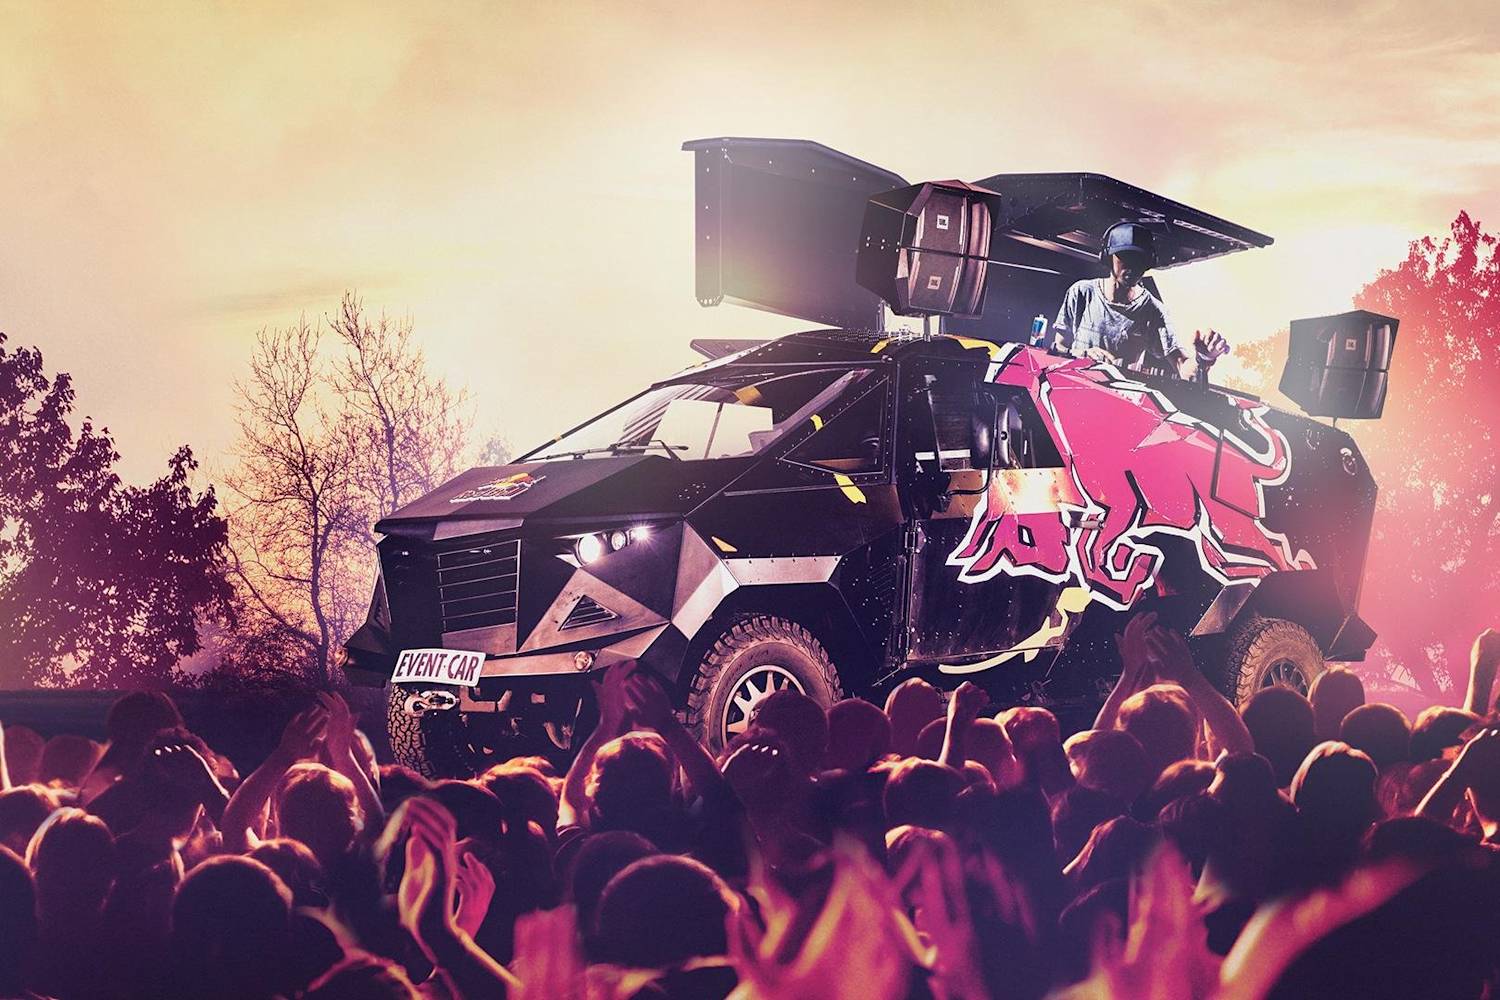 Red Bull Summer win event car terms and conditions